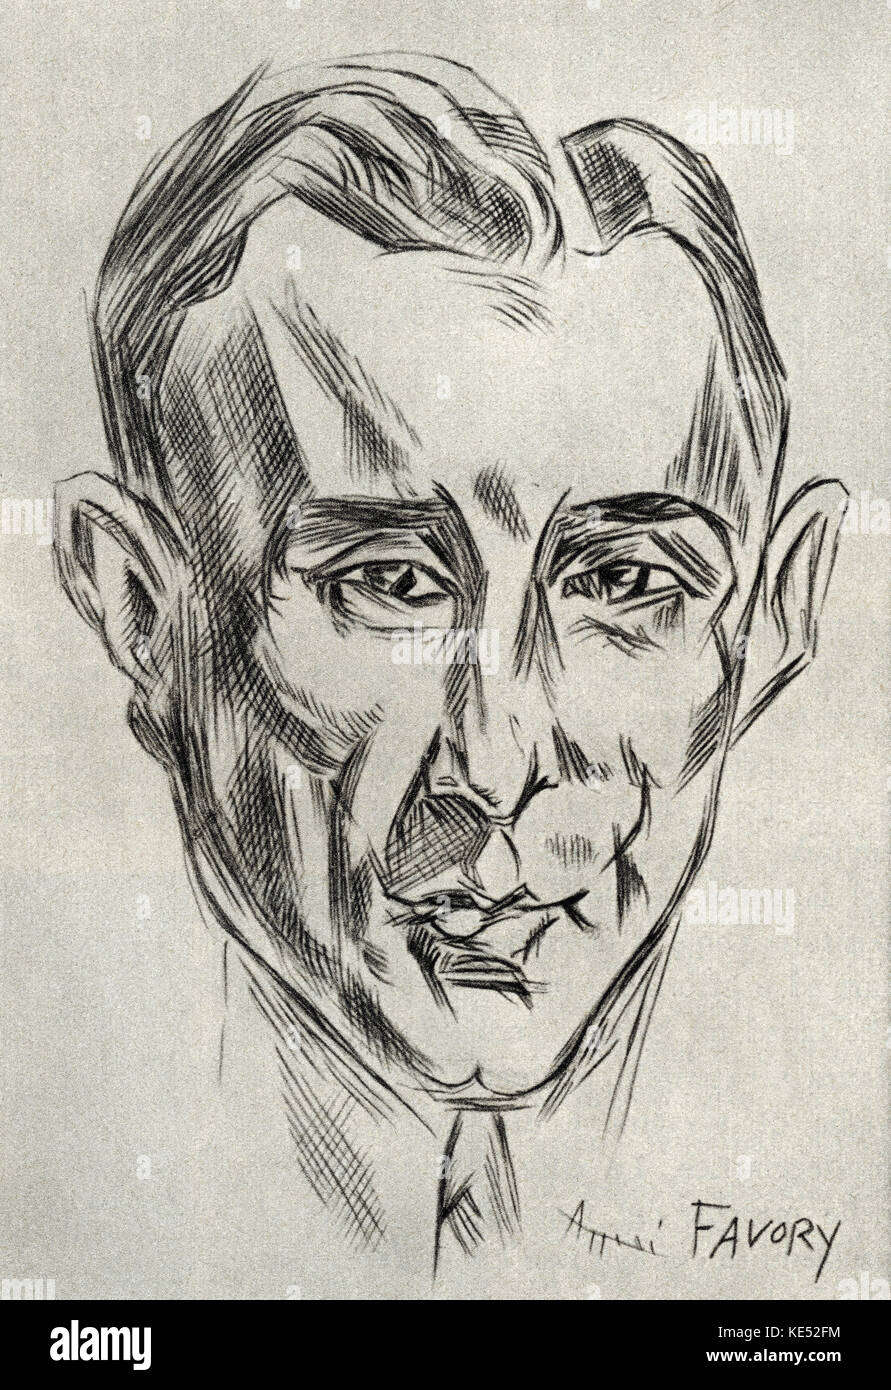 Maurice Ravel - drawing by André Favory  1888–1937. French composer, 17 March 1875 - 28 December 1937. Stock Photo